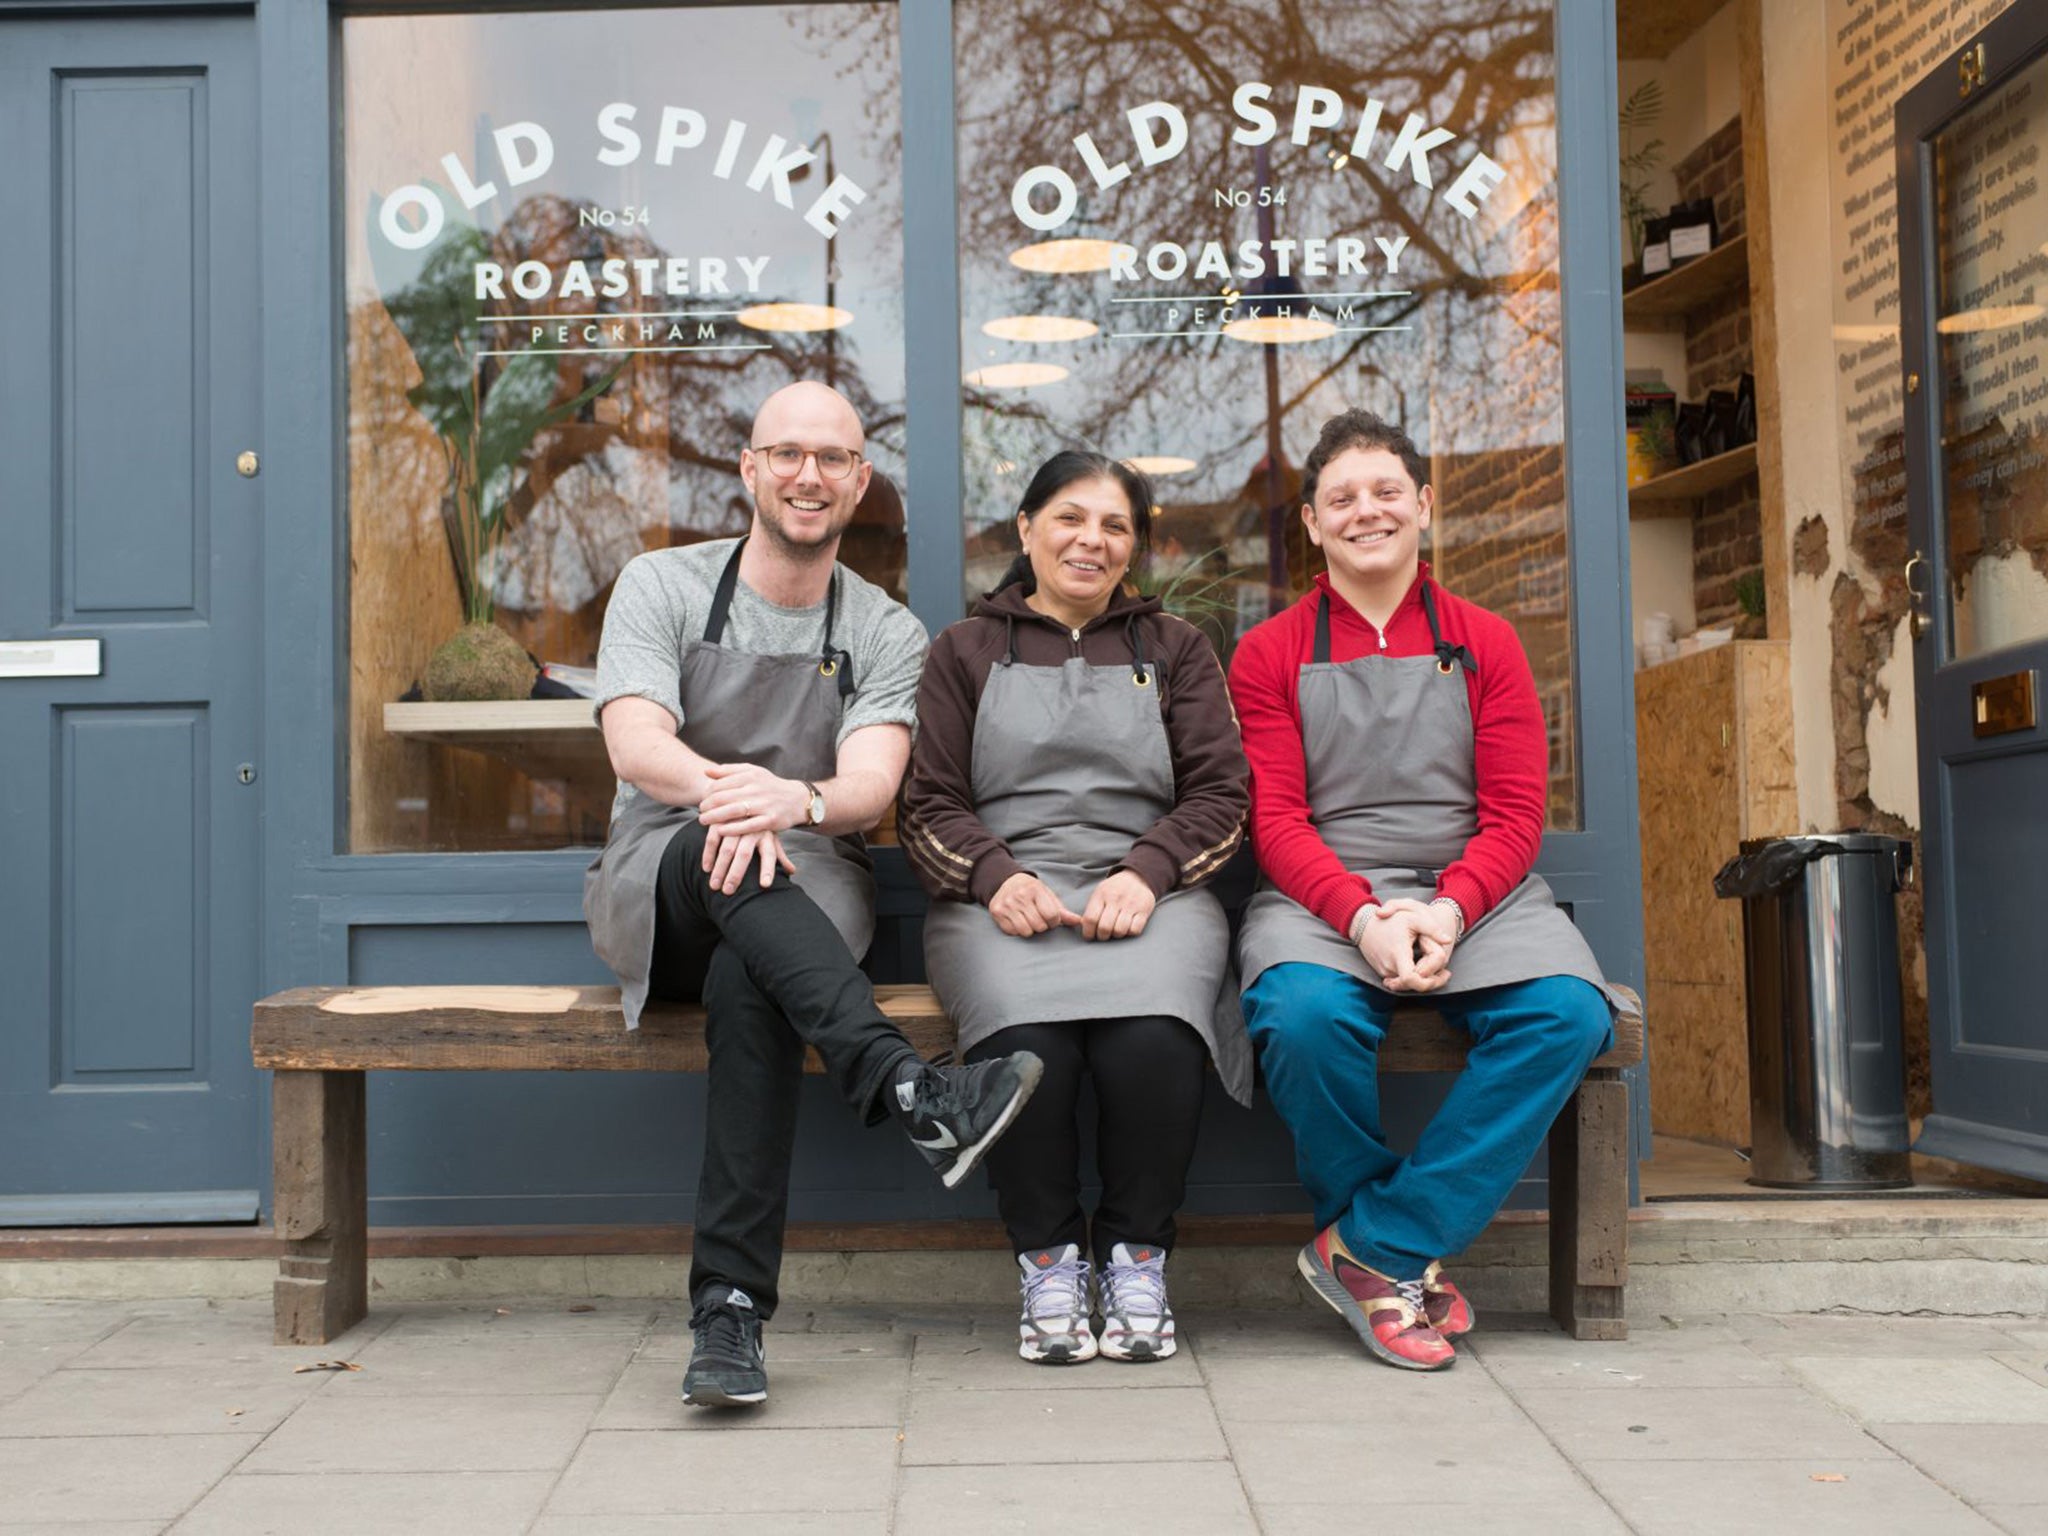 The Old Spike Roastery: The London coffee roasting company providing  housing and an income to the homeless, The Independent